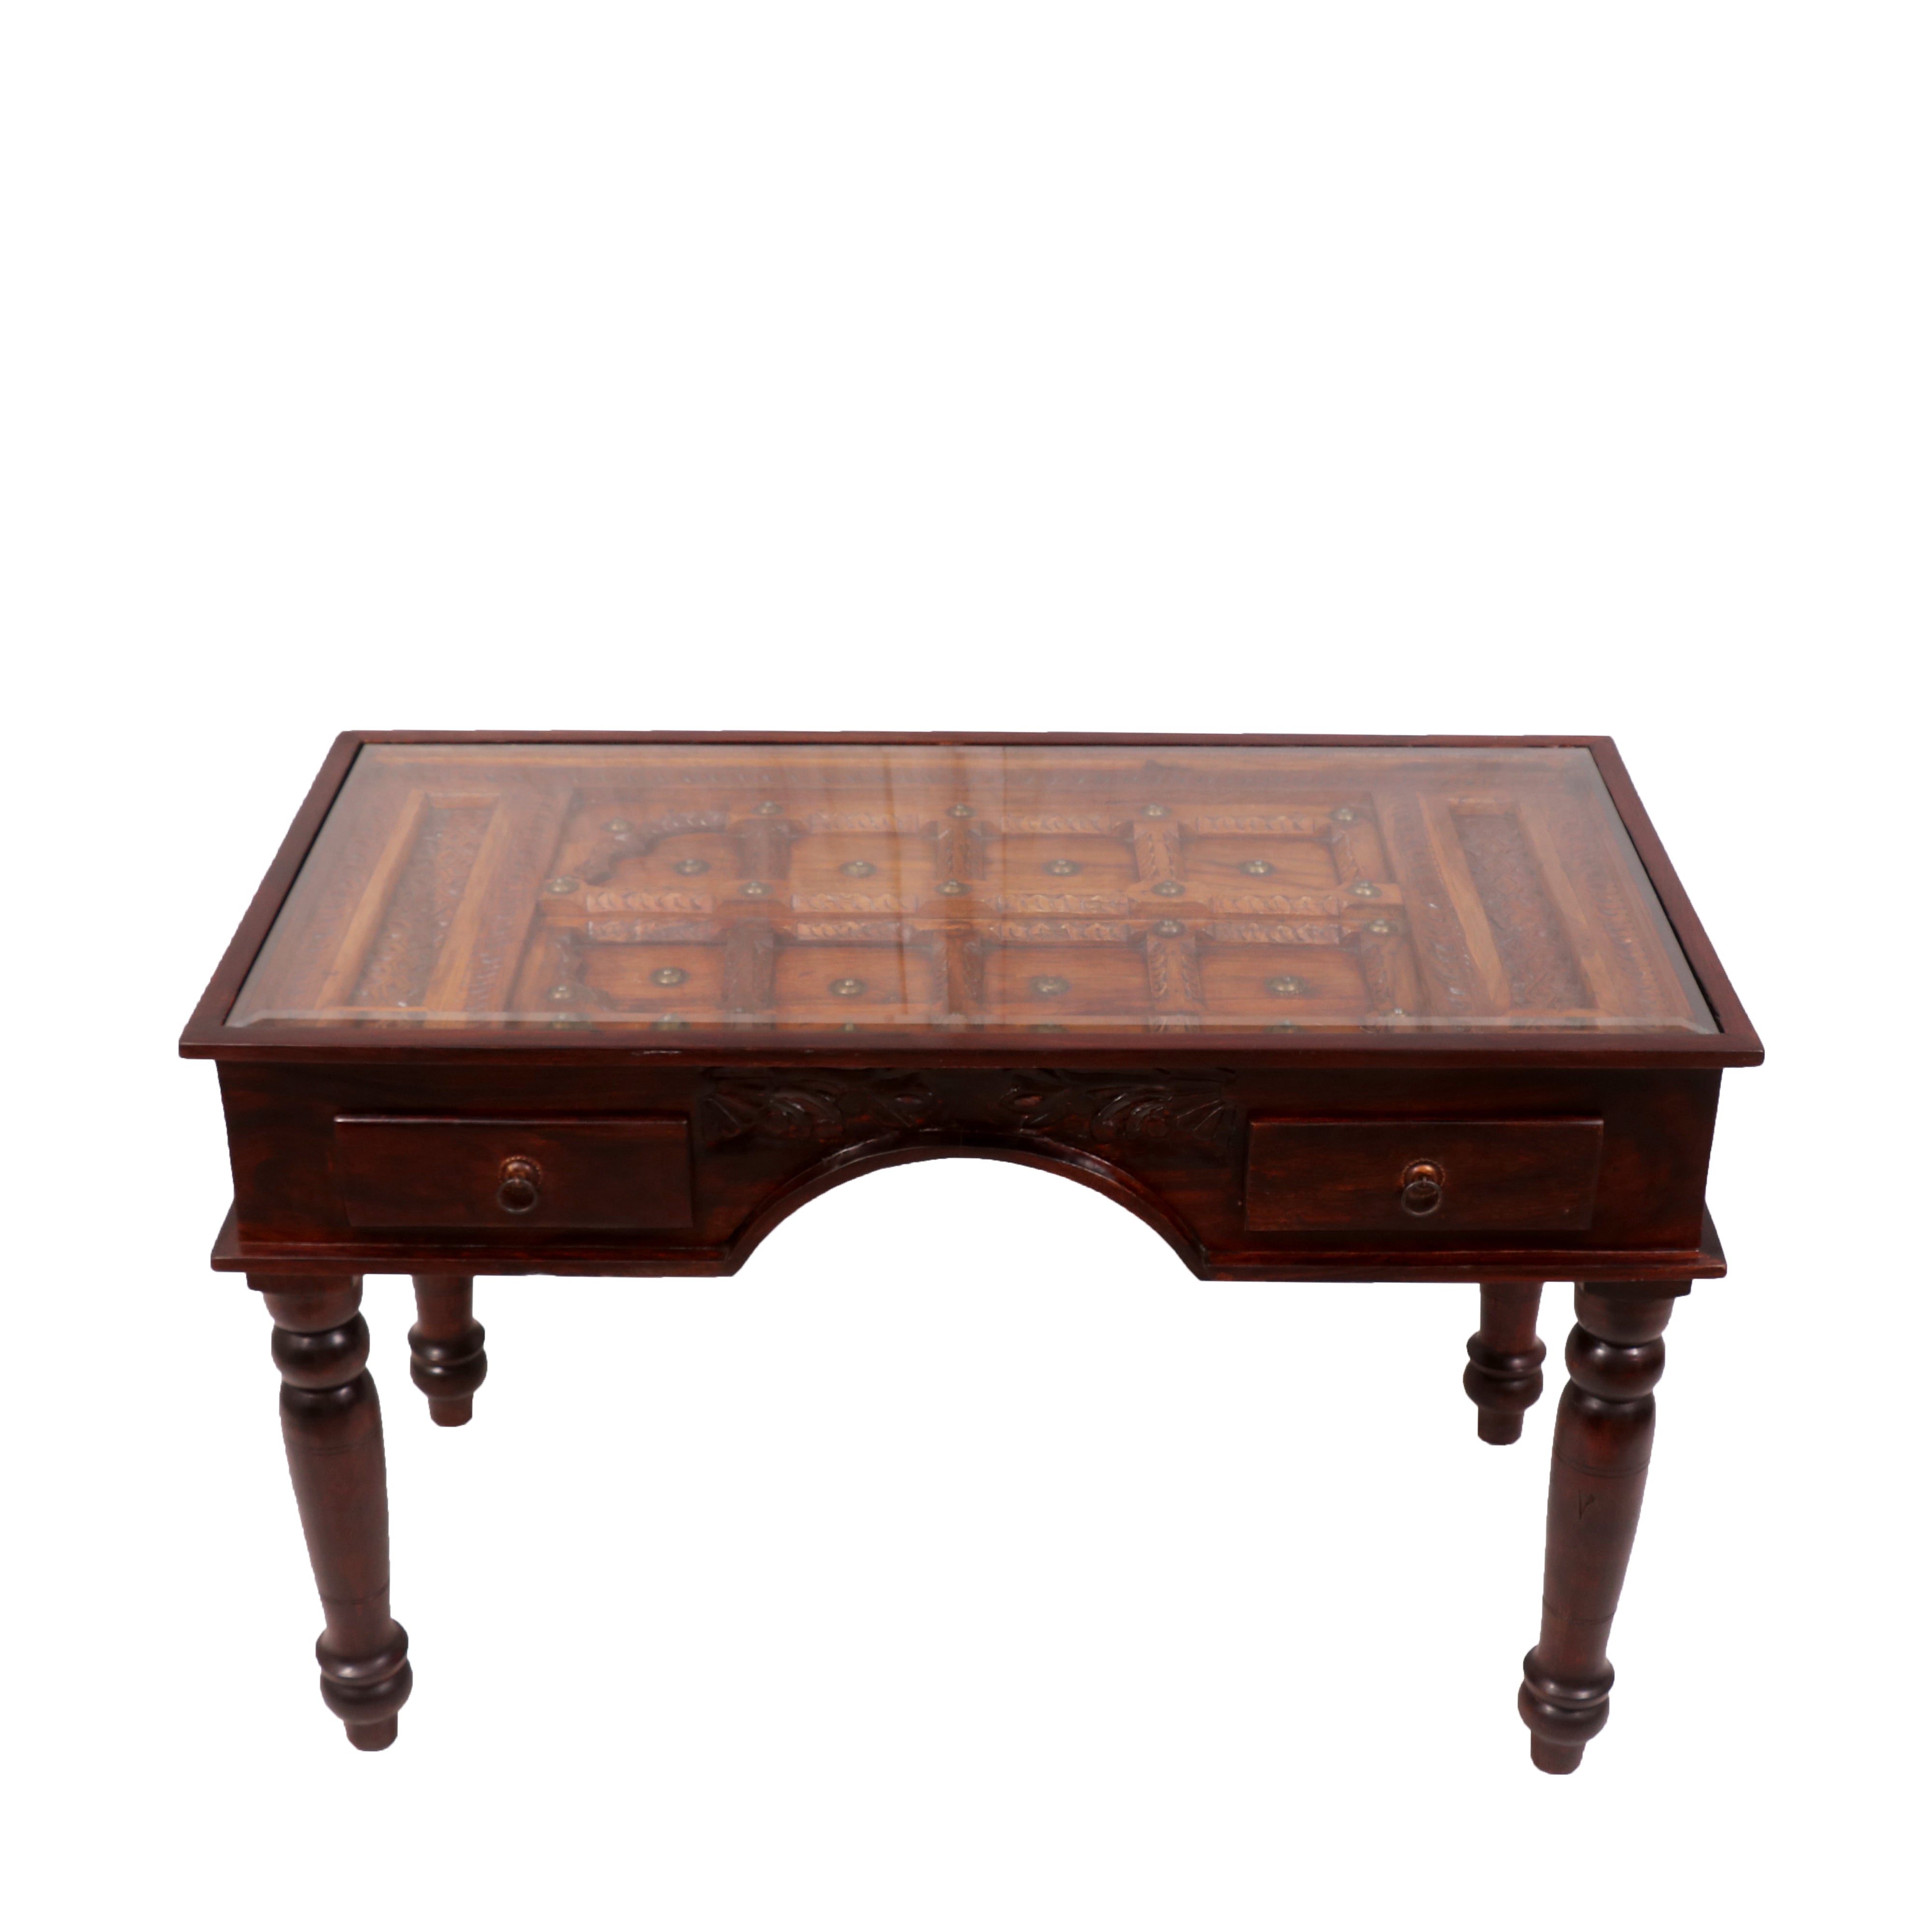 Wooden Coffee Brown Study Table Study Table